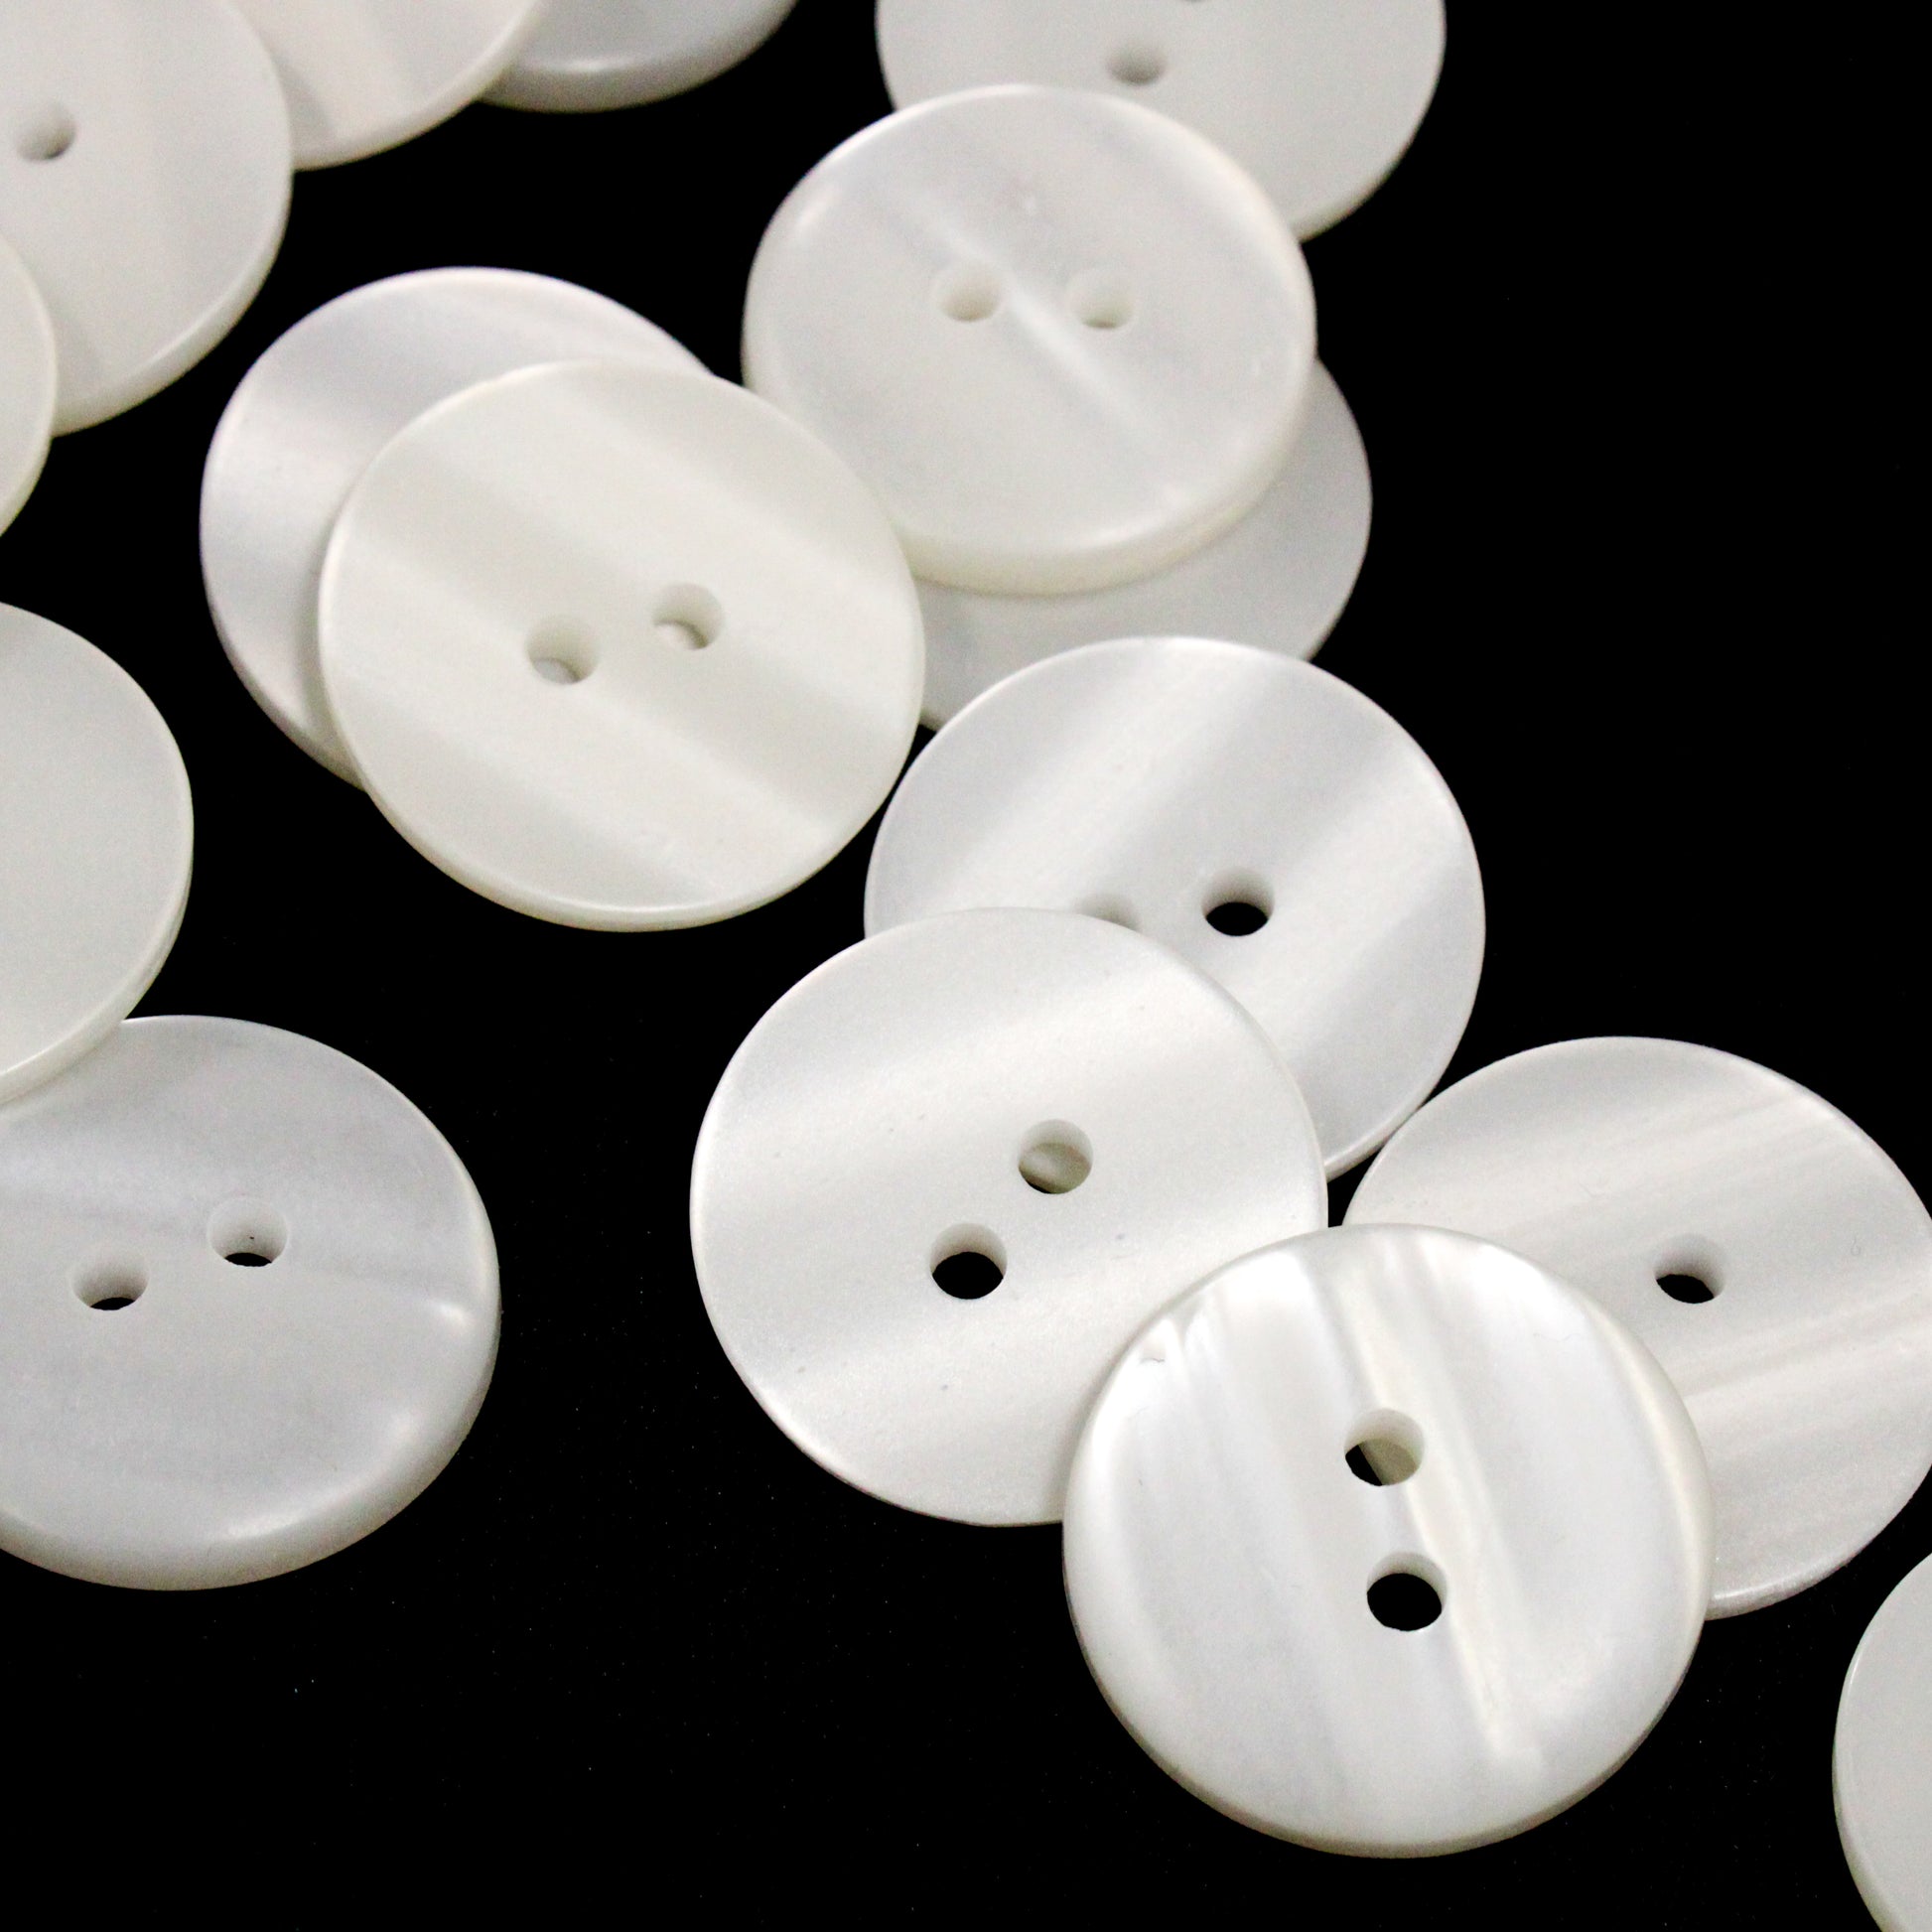 FLAT PEARL BUTTONS